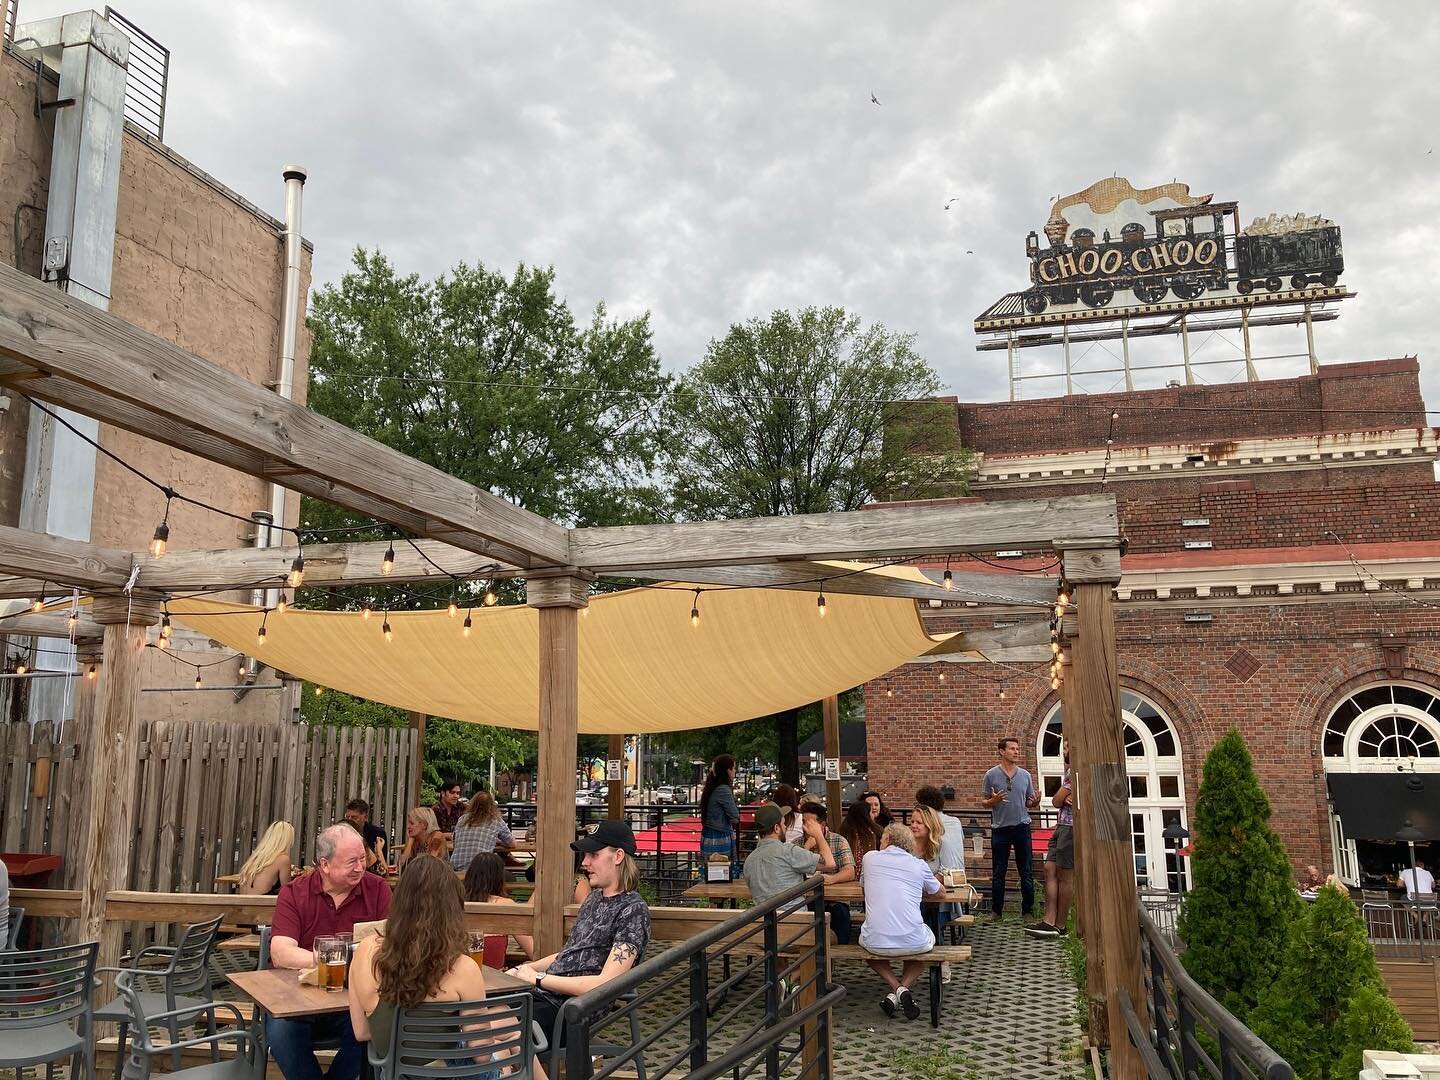 Almost feeling like summer on the patio again and we&rsquo;re so stoked!! Lotta plans in the works for this space ⛱️

#chattanoogatn #chattanooga #chattanoogapatio